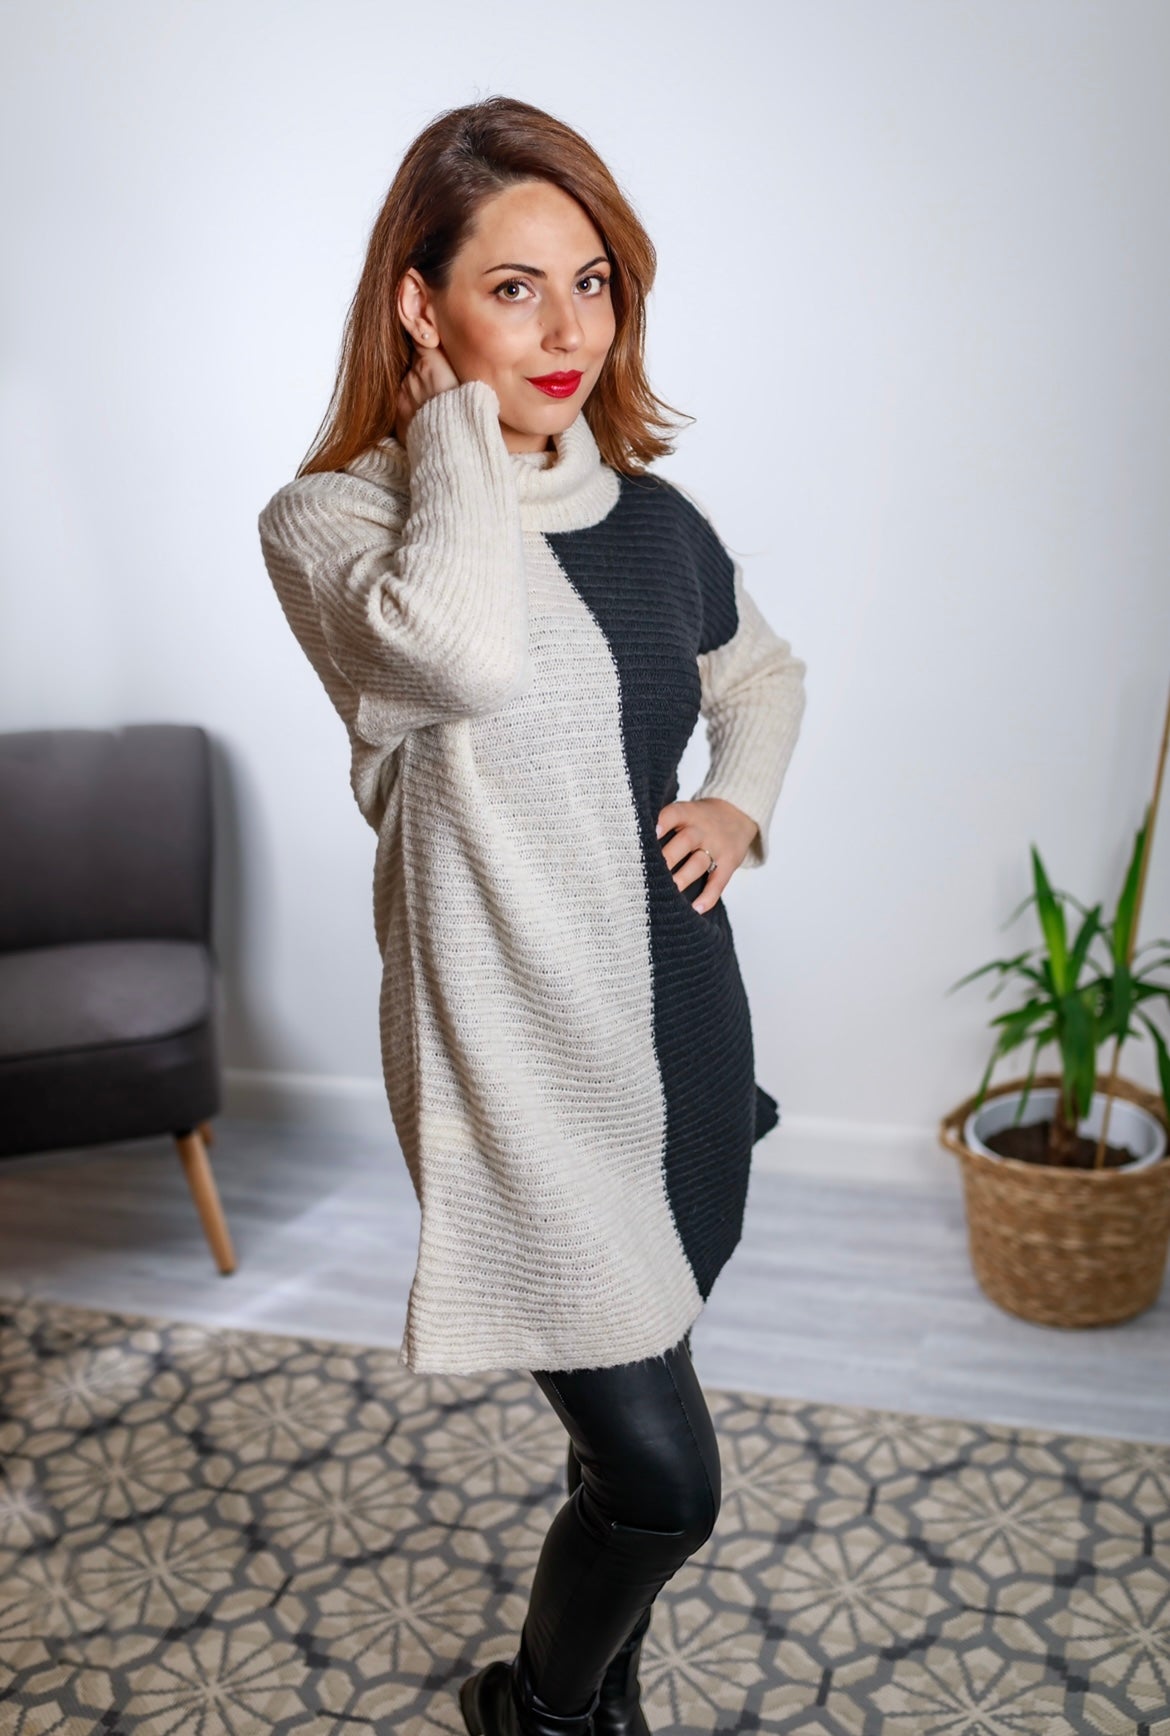 Bilbao Block Knit Long Sleeve Roll Neck Dress In Black and Cream